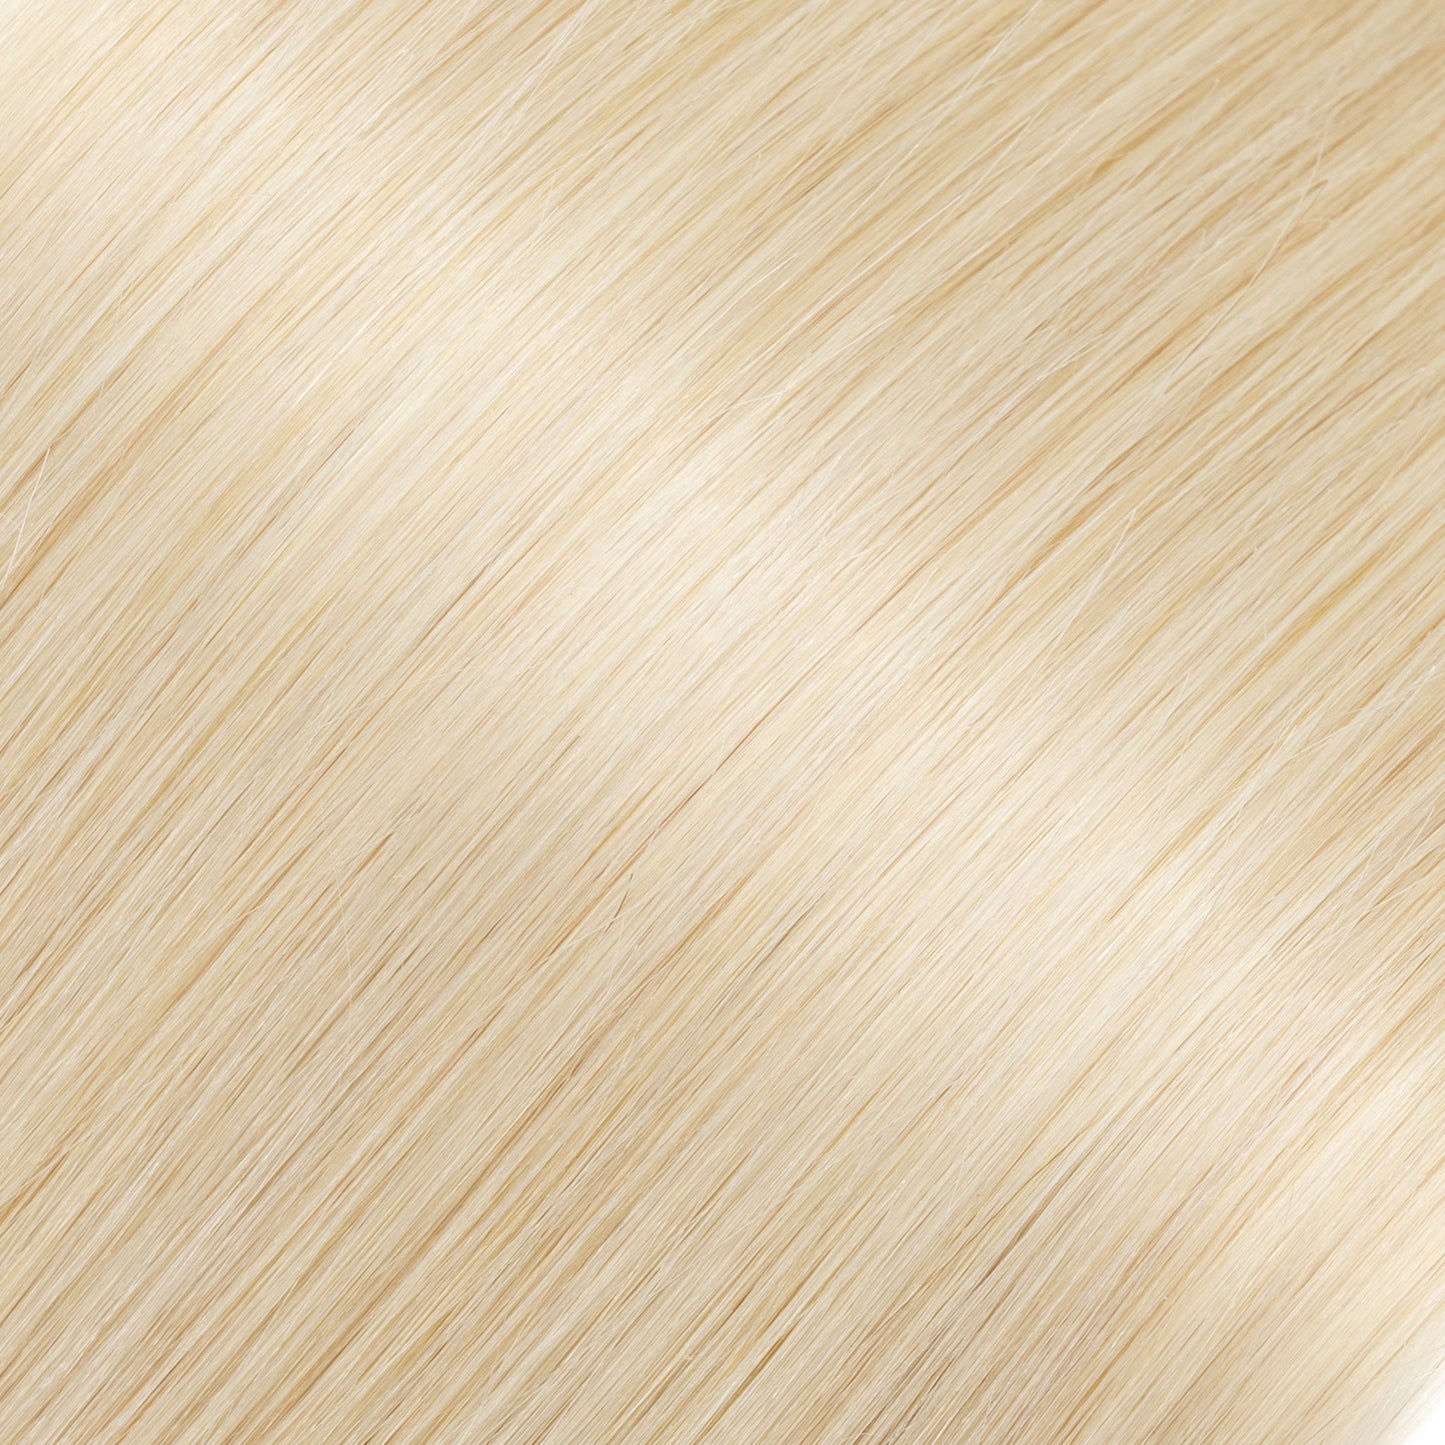 Platinum Blonde Tape in Hair Extensions Invisible Weft 10 PCS segohair.com